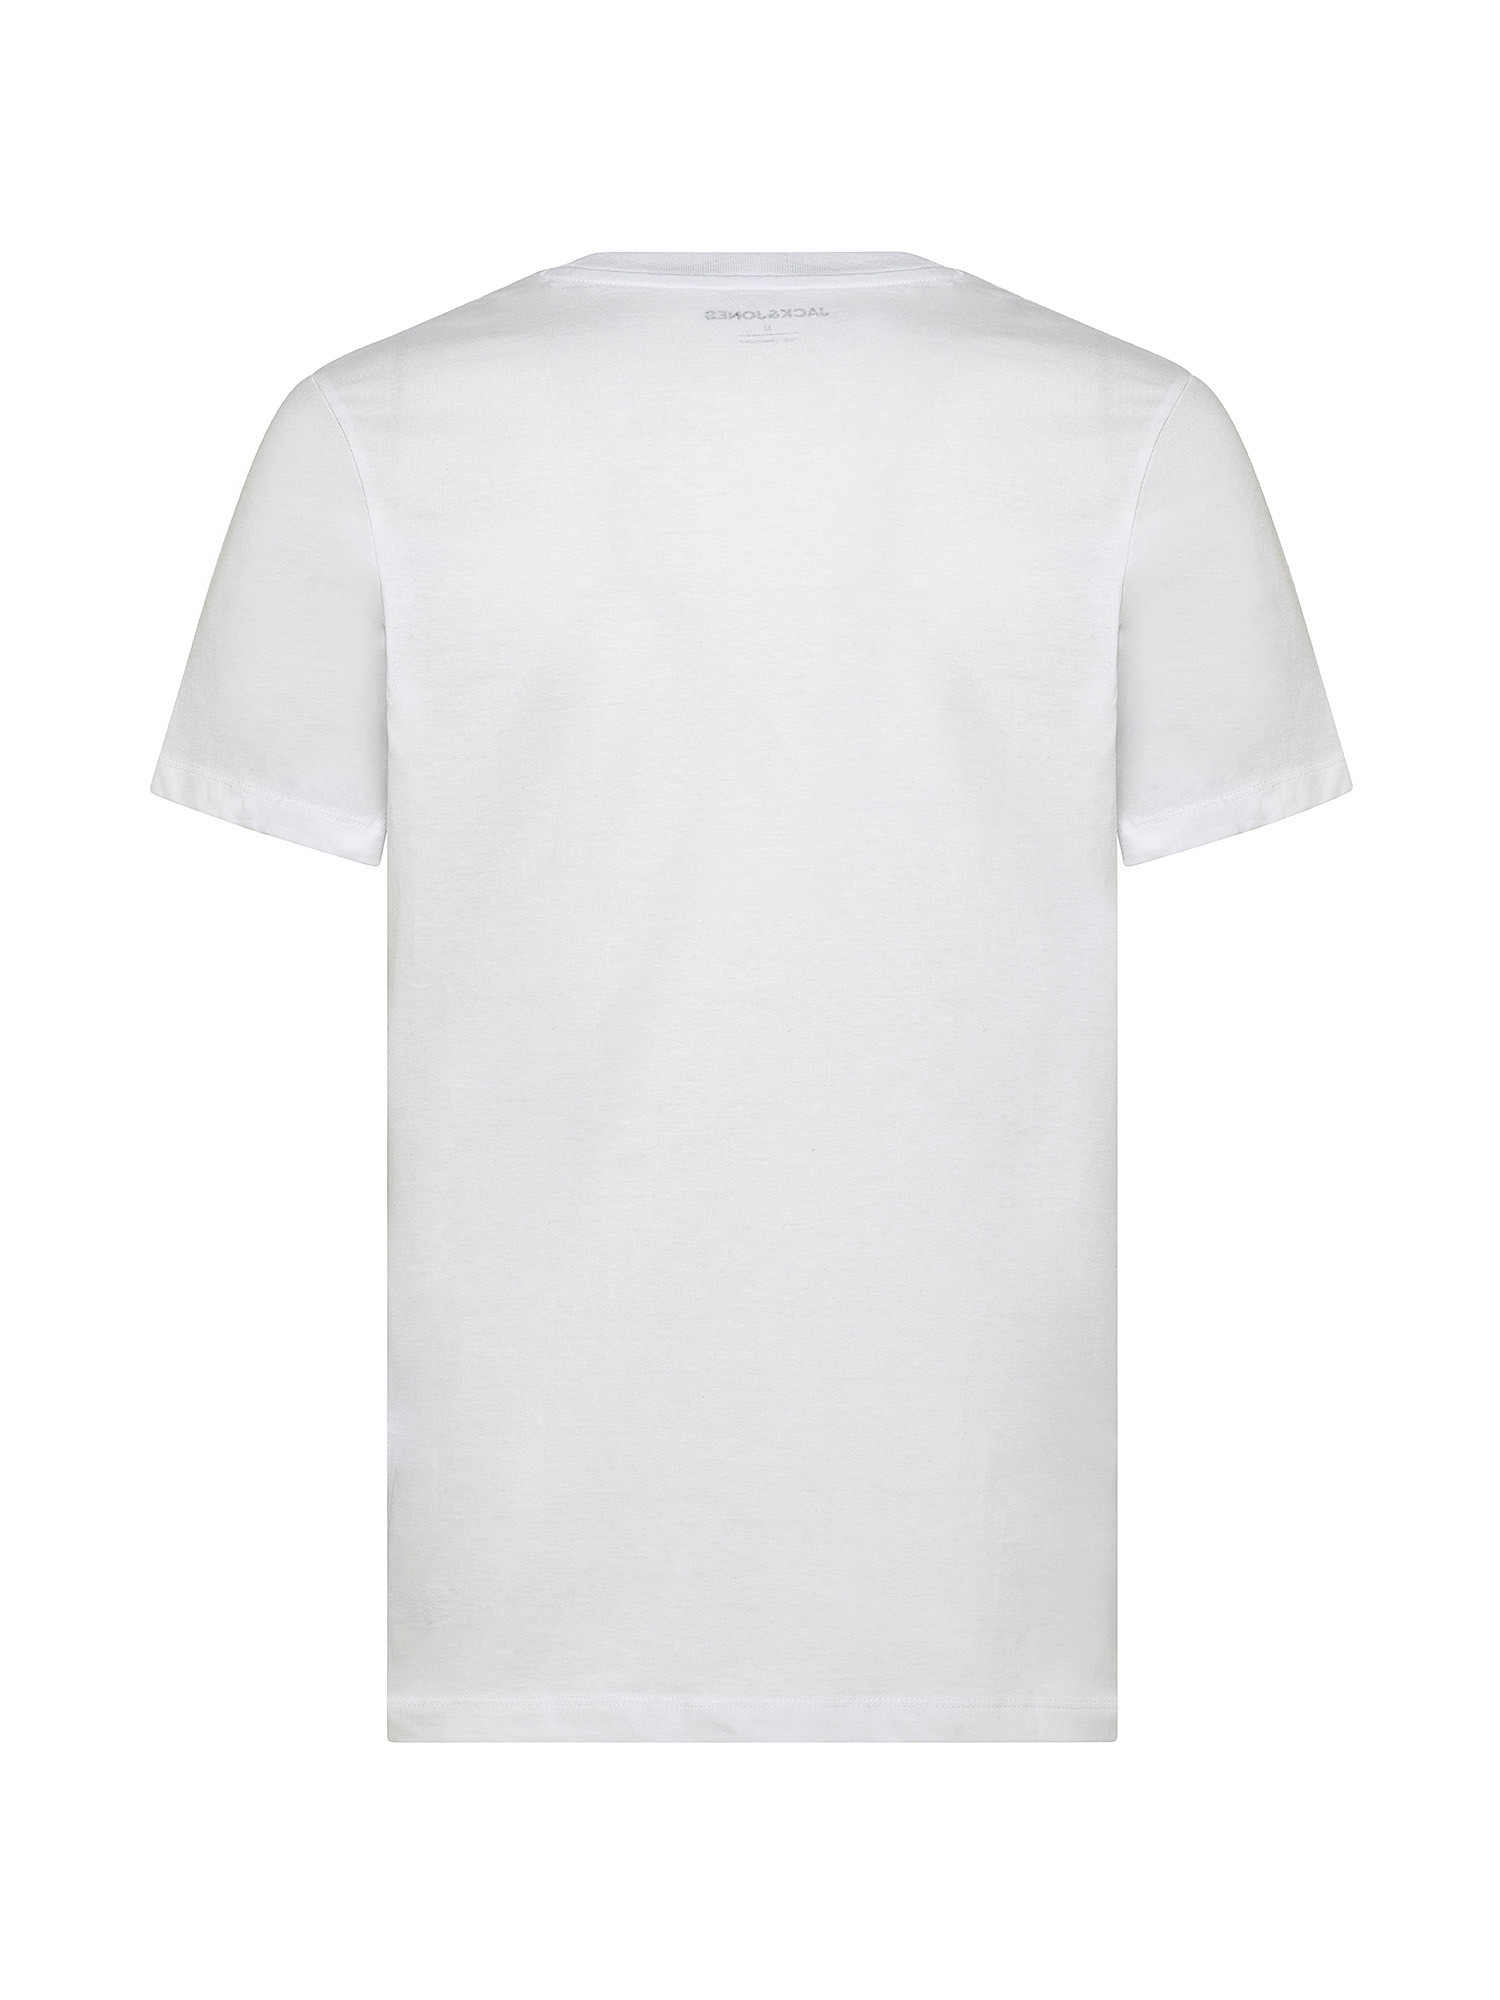 T-shirt in 100% cotton, White, large image number 1